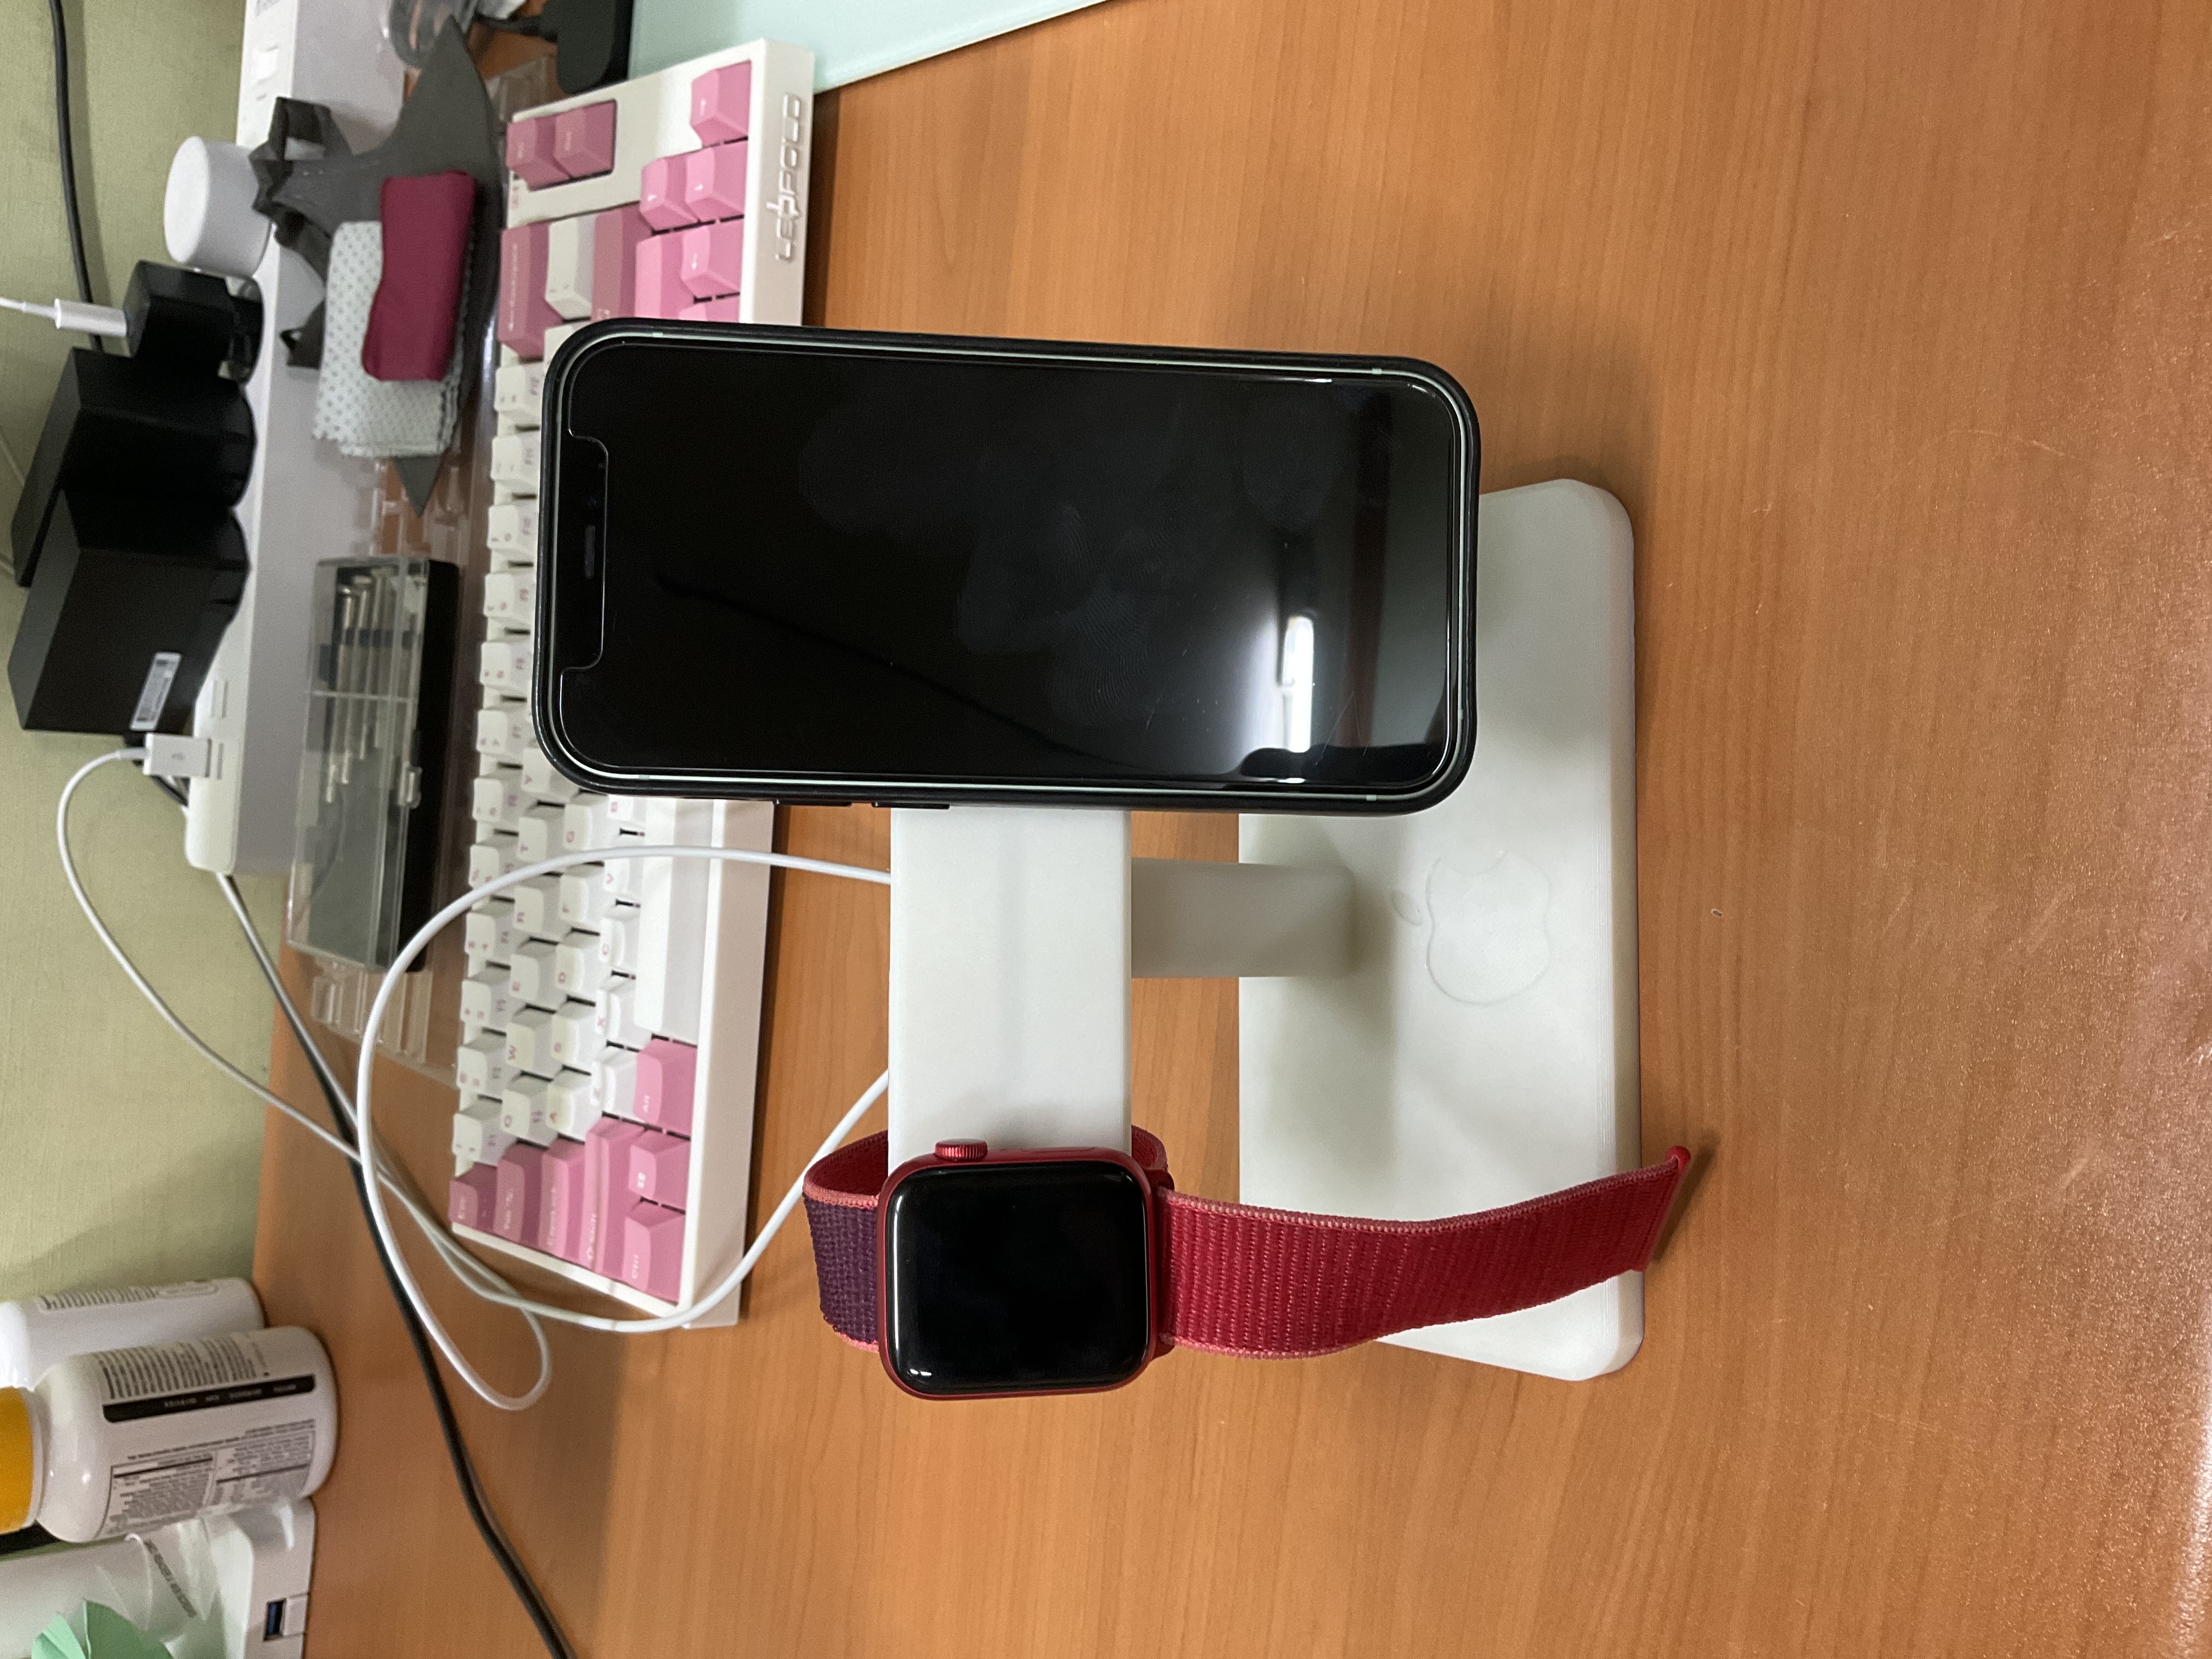 Apple watch and magsafe charger stand